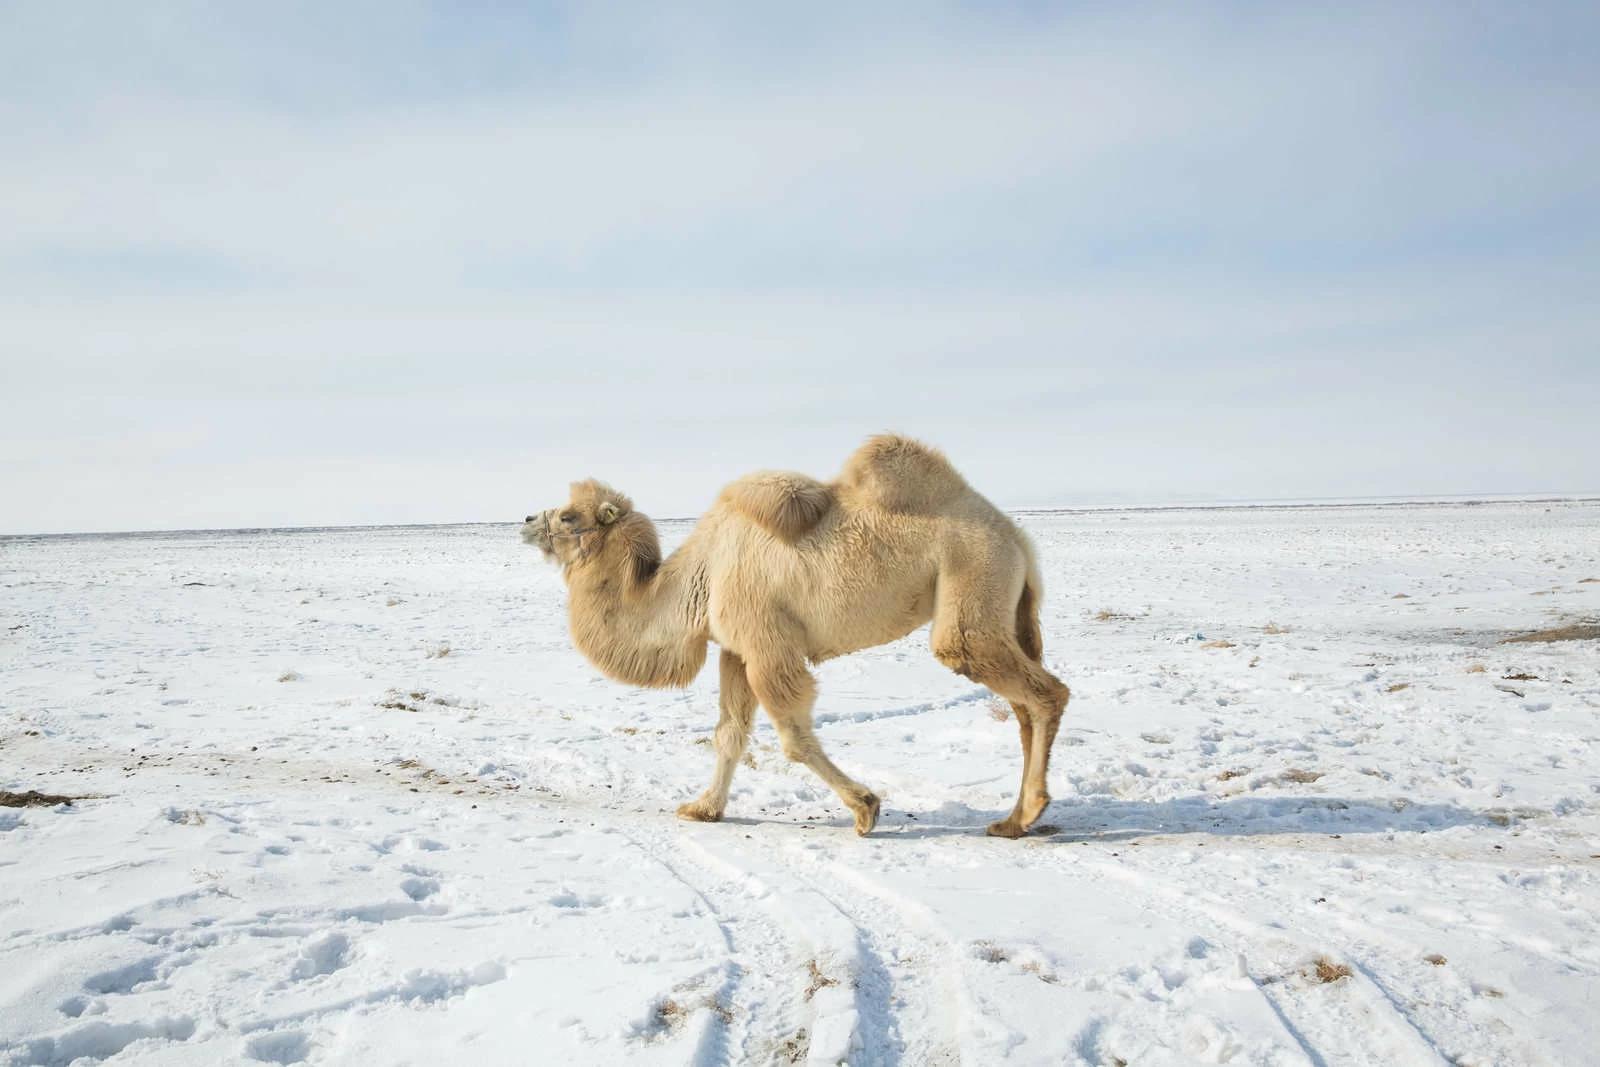 A camel walks near Tastubek, Kazakhstan. The Aral Sea, once the fourth-largest lake in the world, started drying out and shrinking due to disastrous Soviet irrigation policies, but a dam has brought water – and fish species- back to the northern section. Photo and story credits by Taylor Weidman.